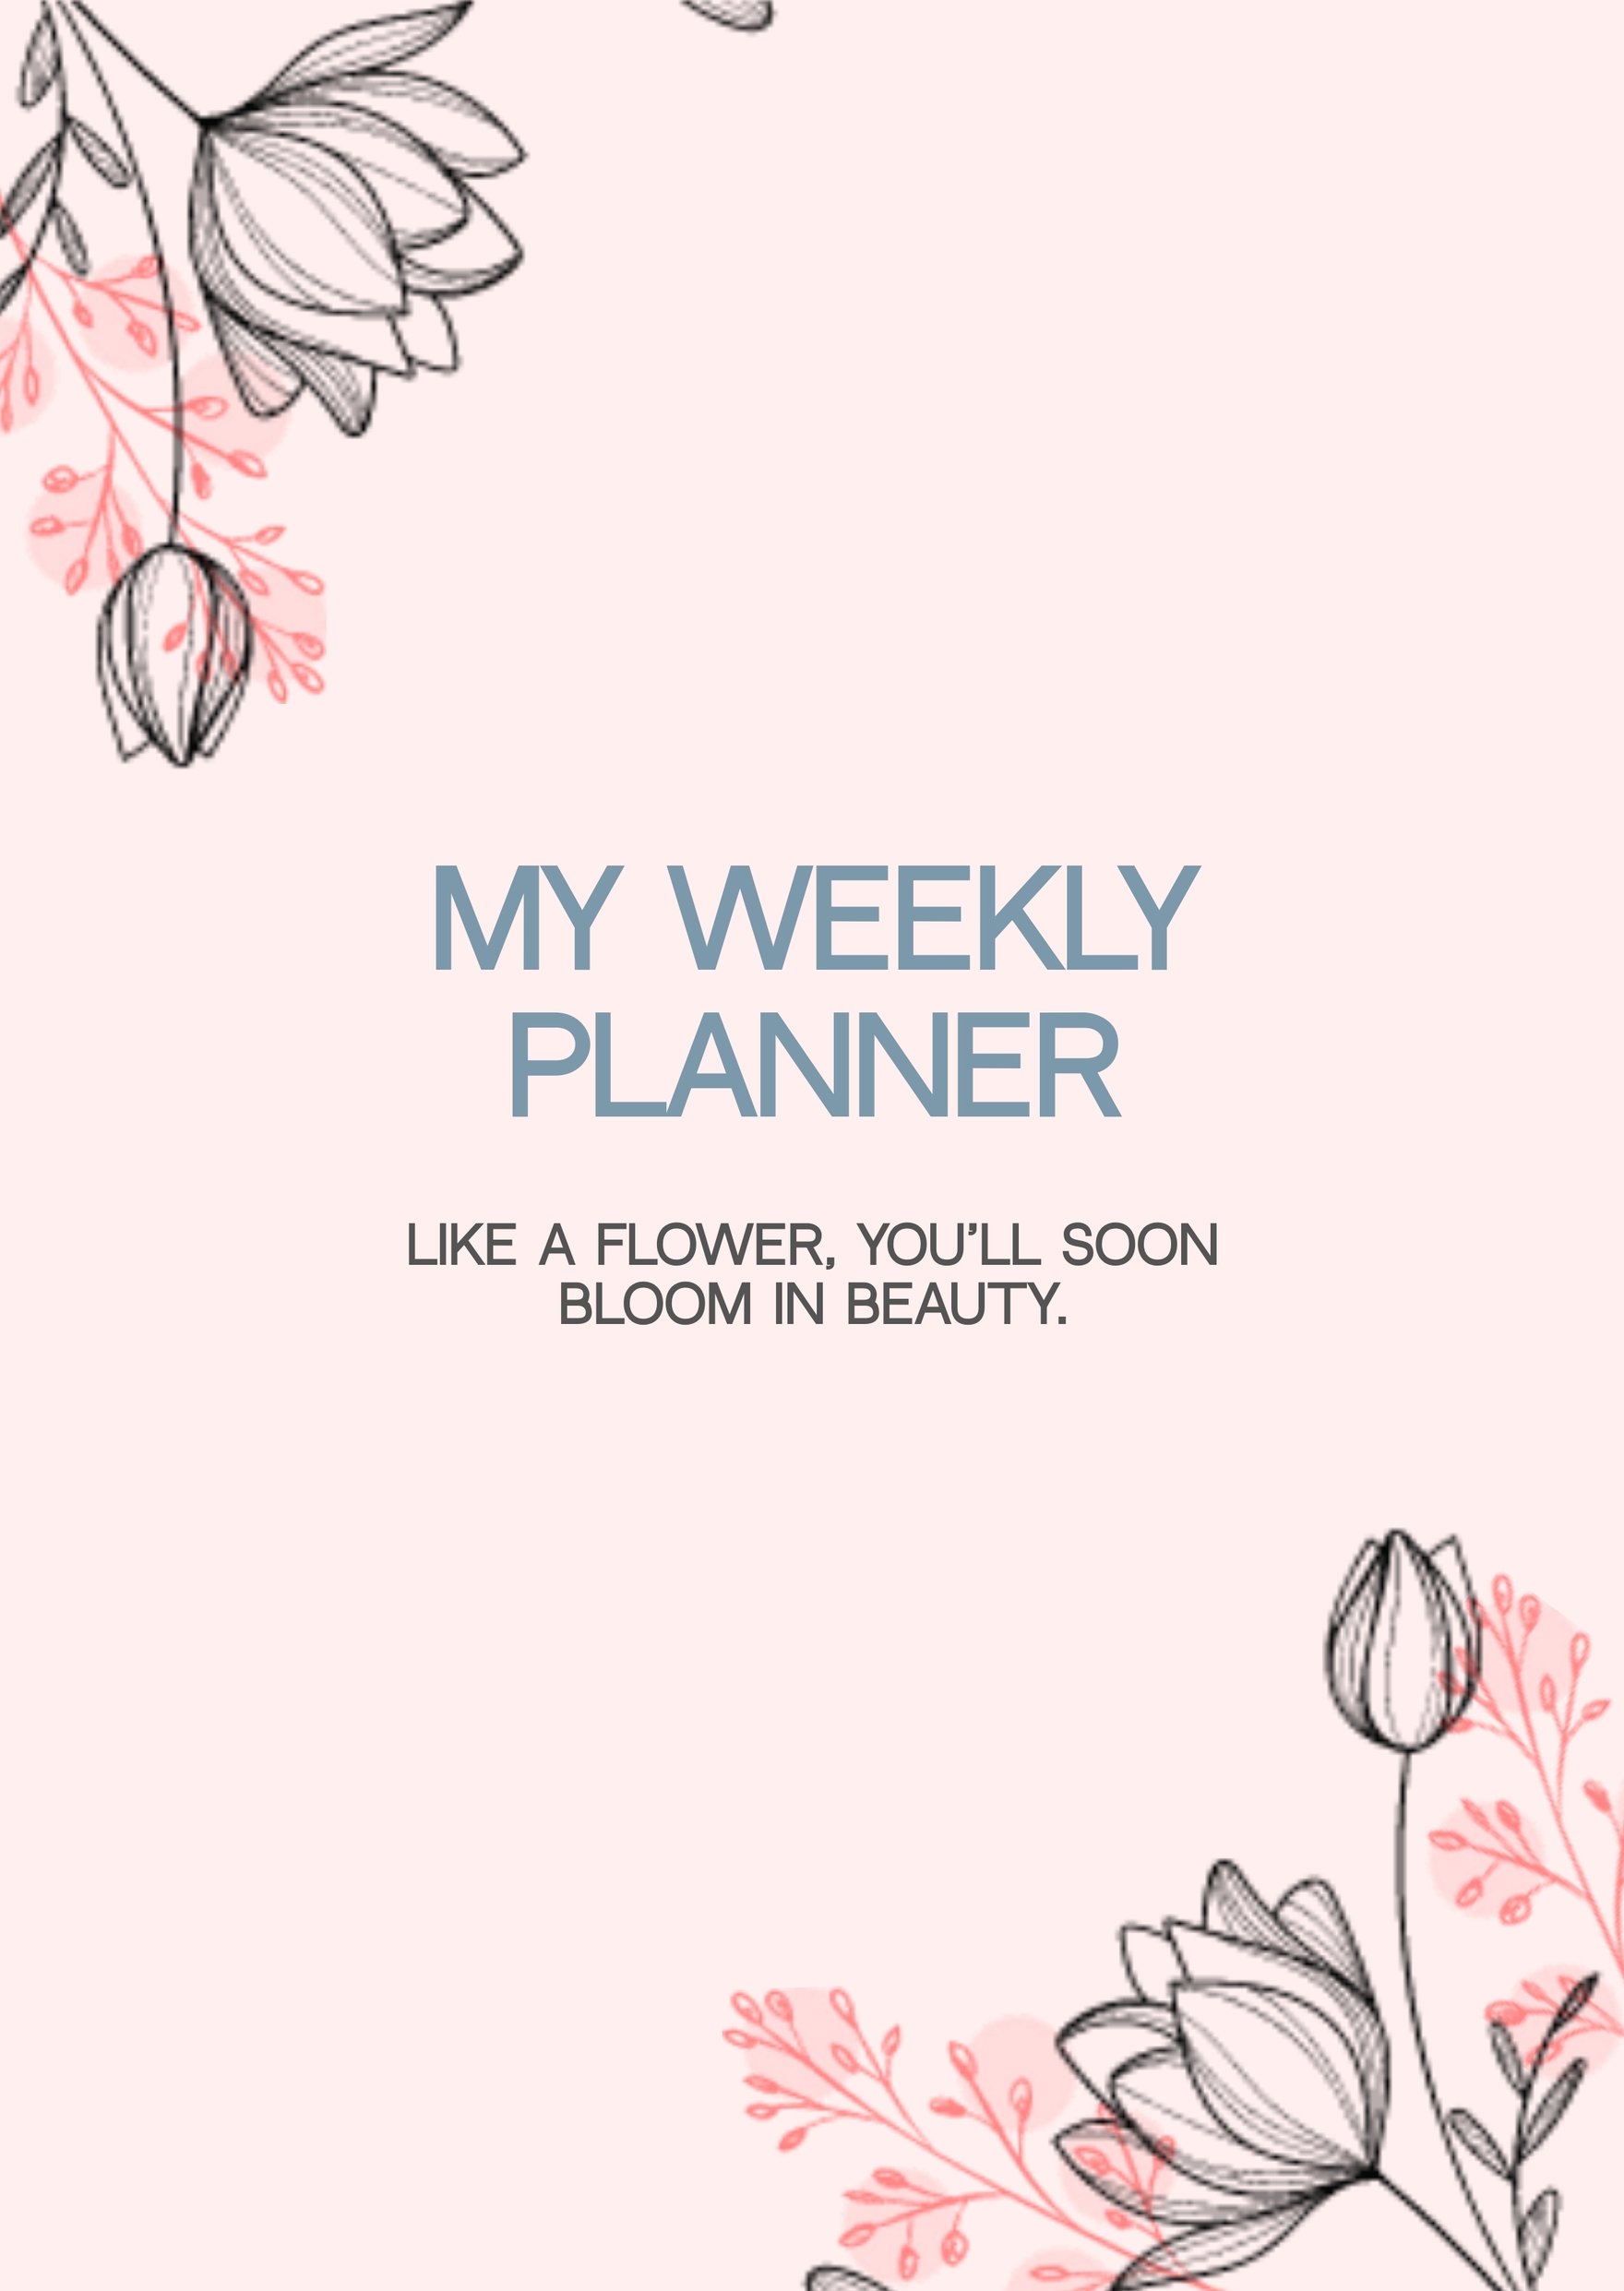 Floral Planner Cover Template in Word, Google Docs, PDF